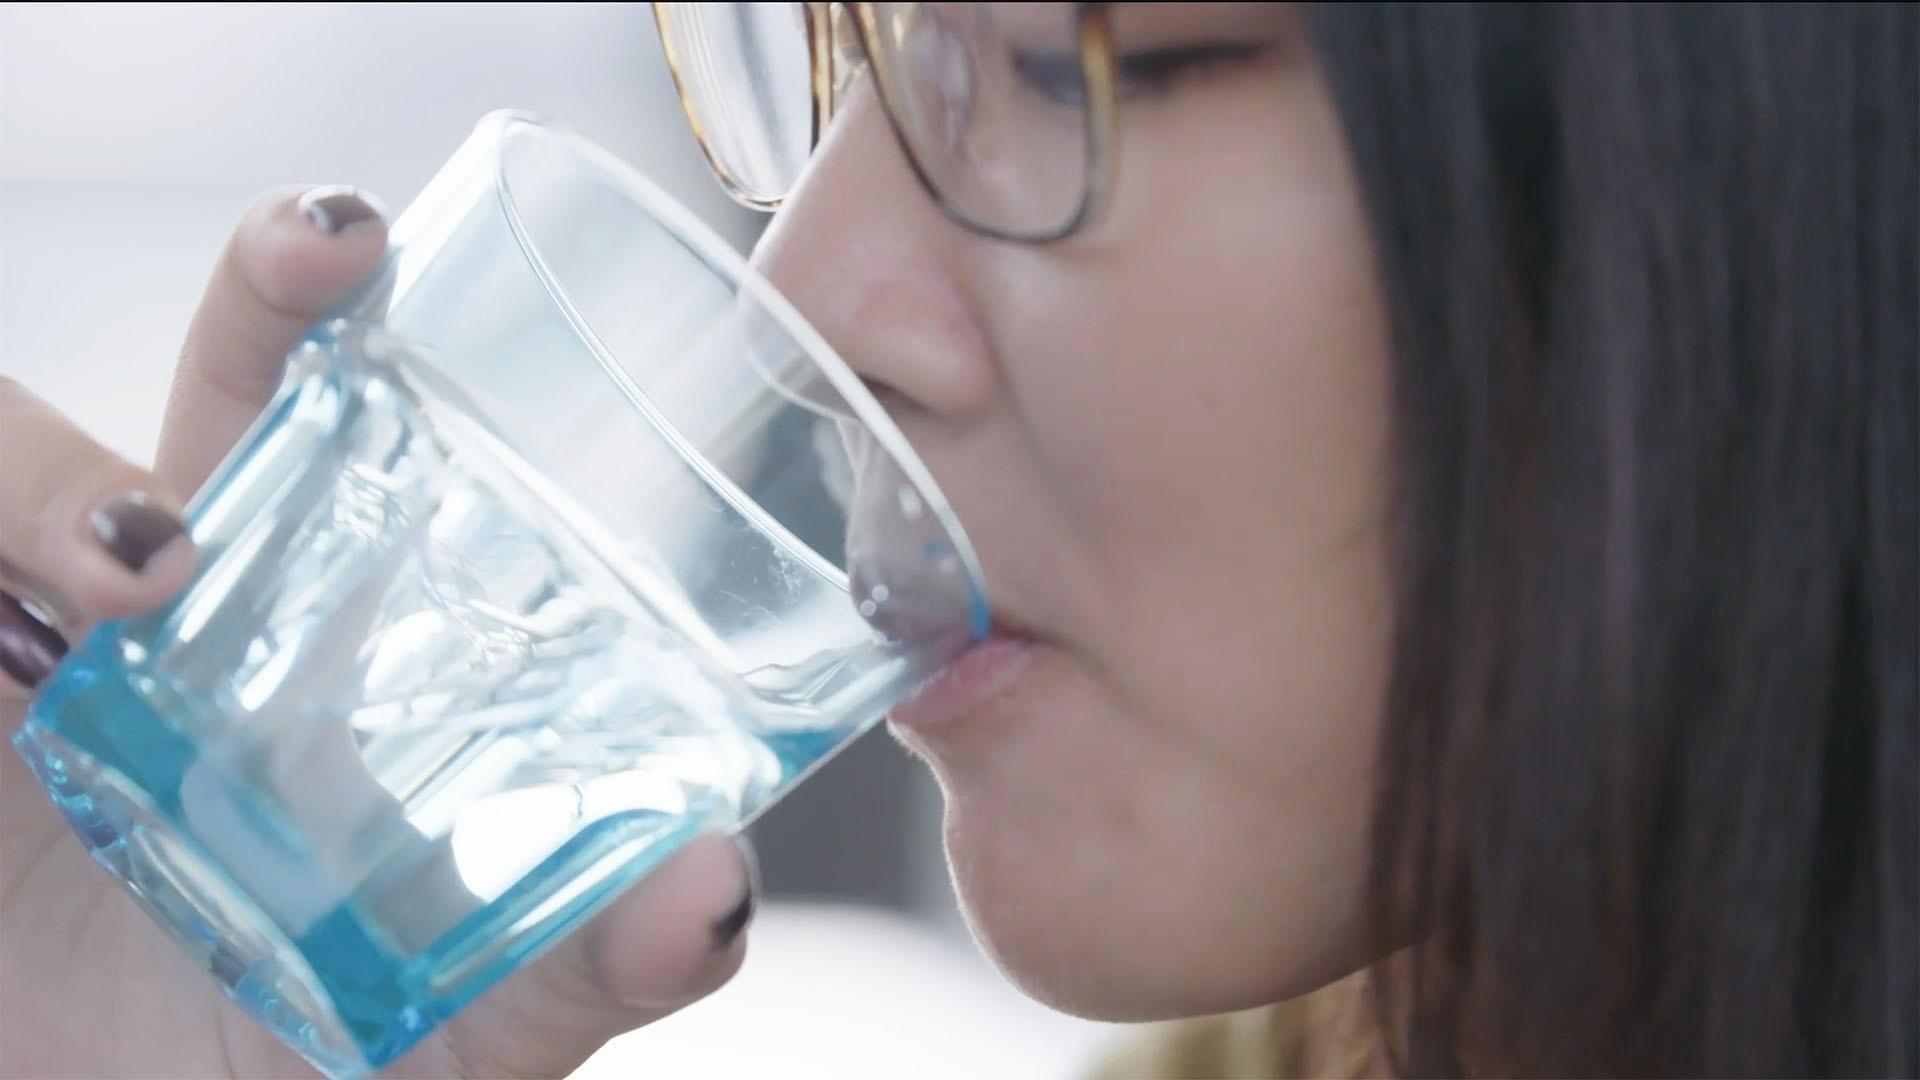 Woman drinking reclaimed water in Singapore.